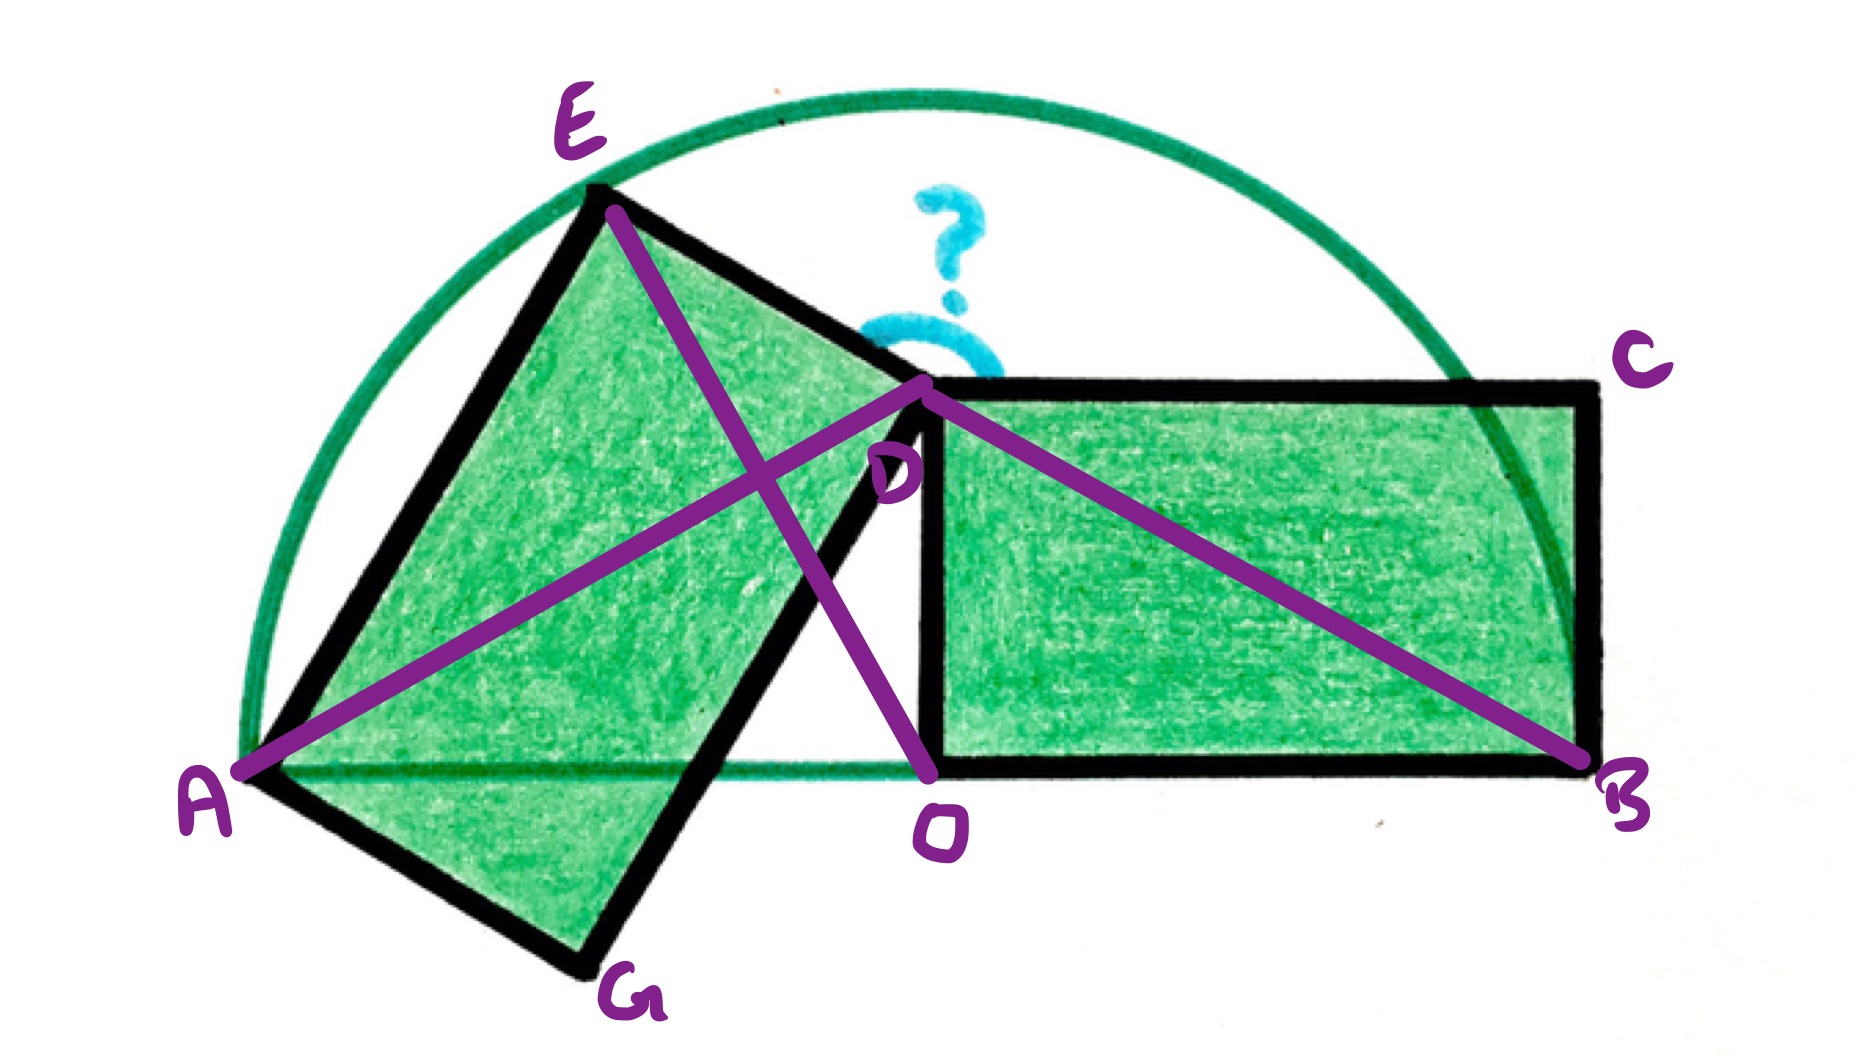 Two congruent rectangles and a semi-circle labelled